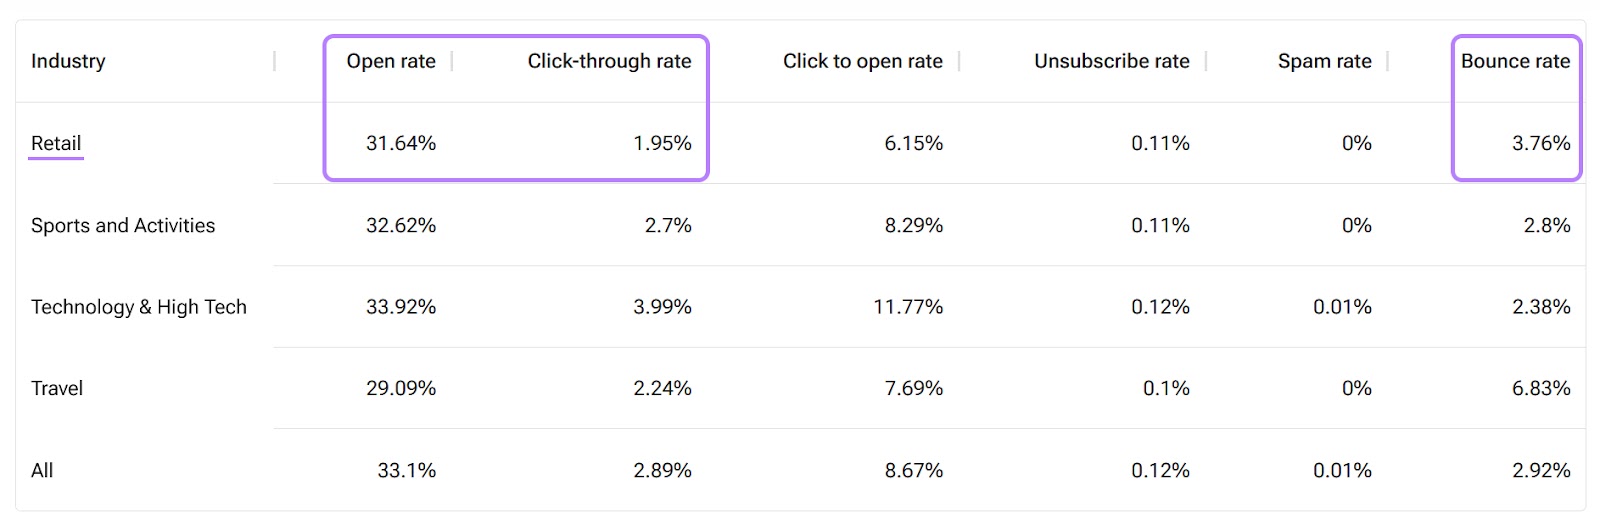 Open rate and click-through rate for retail industry